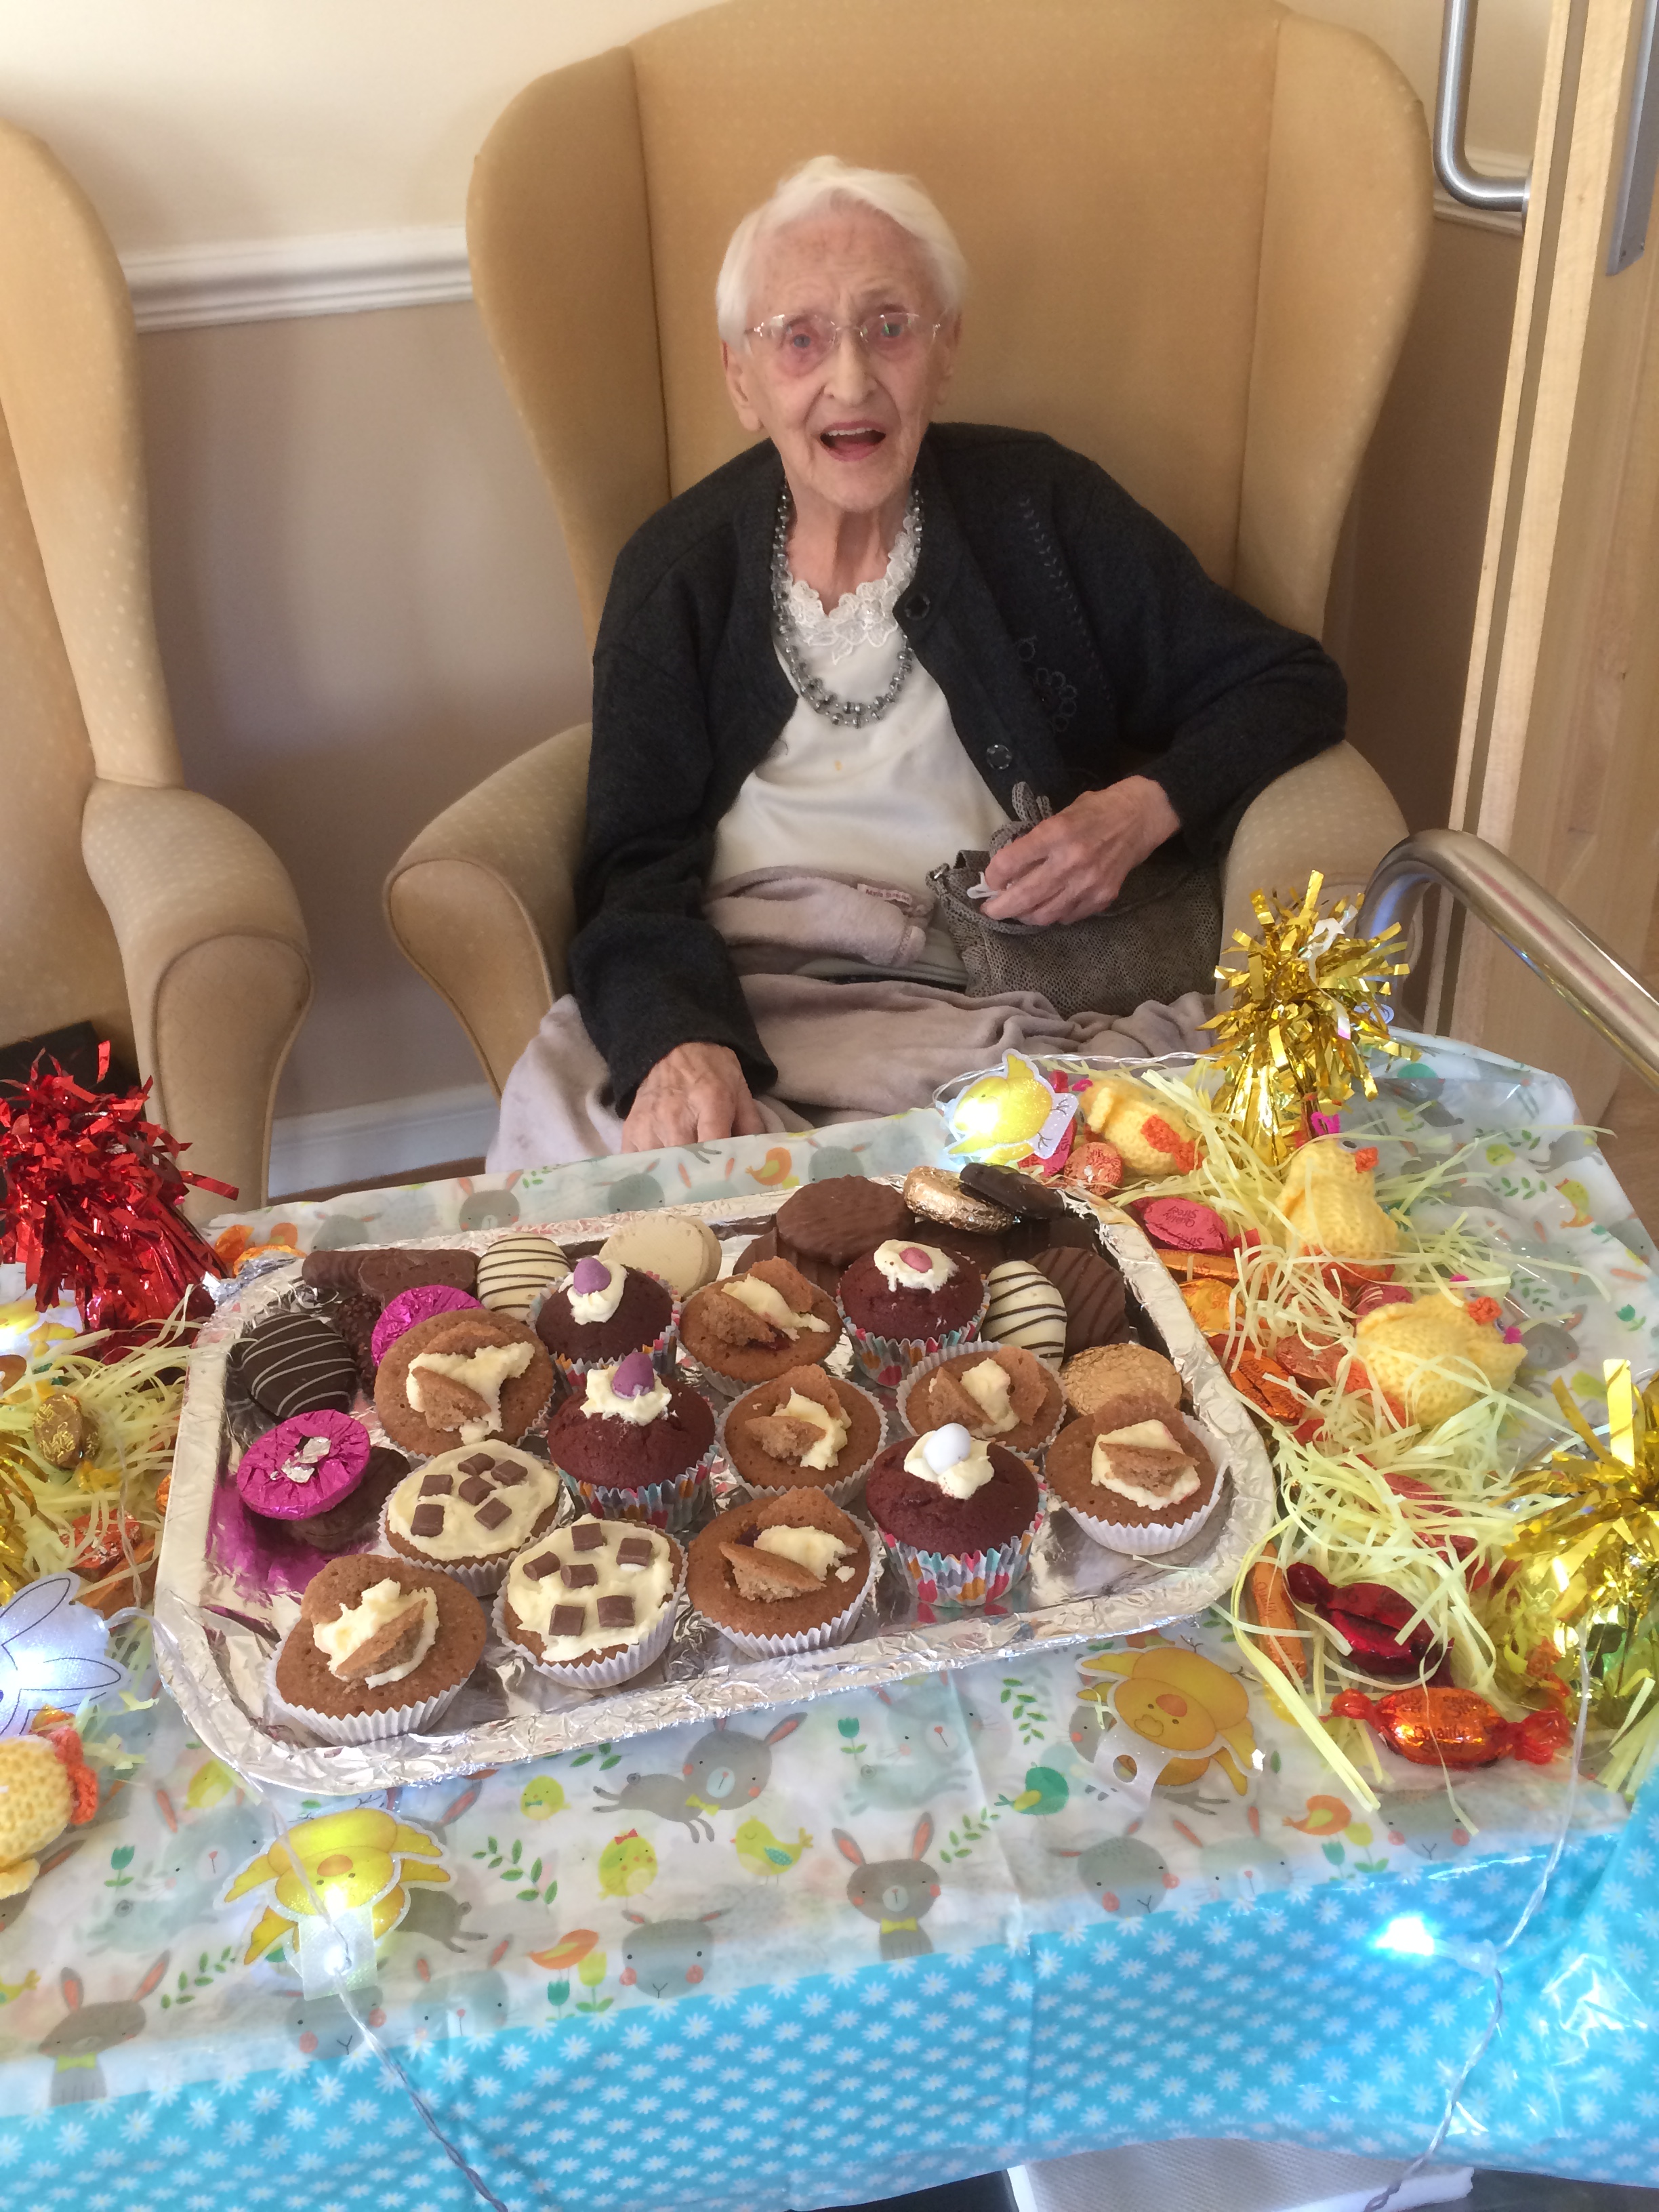 Easter Trolley 2018: Key Healthcare is dedicated to caring for elderly residents in safe. We have multiple dementia care homes including our care home middlesbrough, our care home St. Helen and care home saltburn. We excel in monitoring and improving care levels.